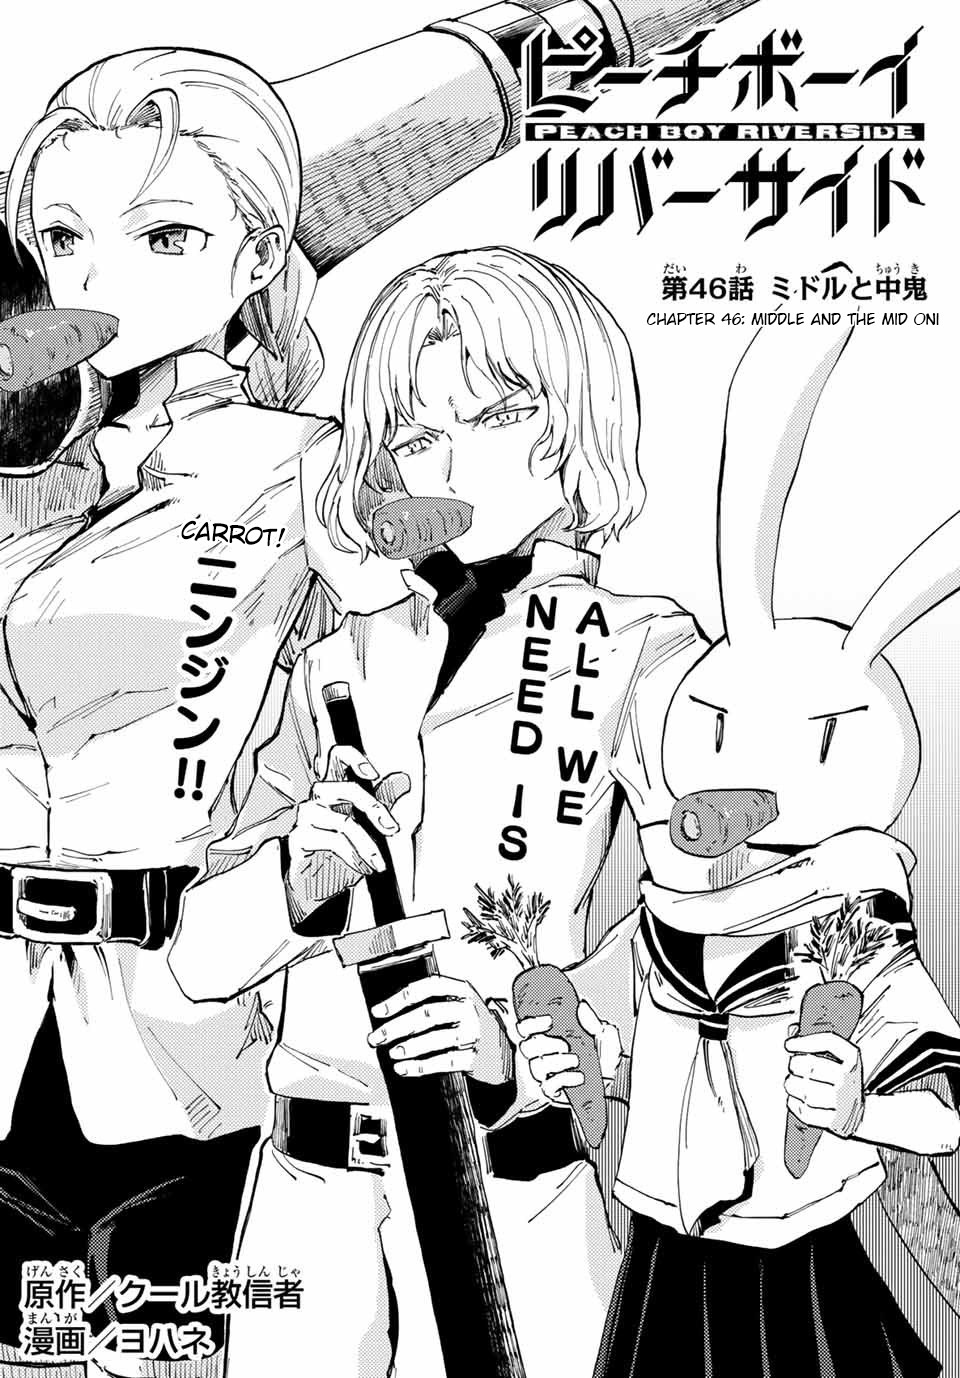 Peach Boy Riverside Chapter 46.1: Middle And Mid Oni - Picture 2